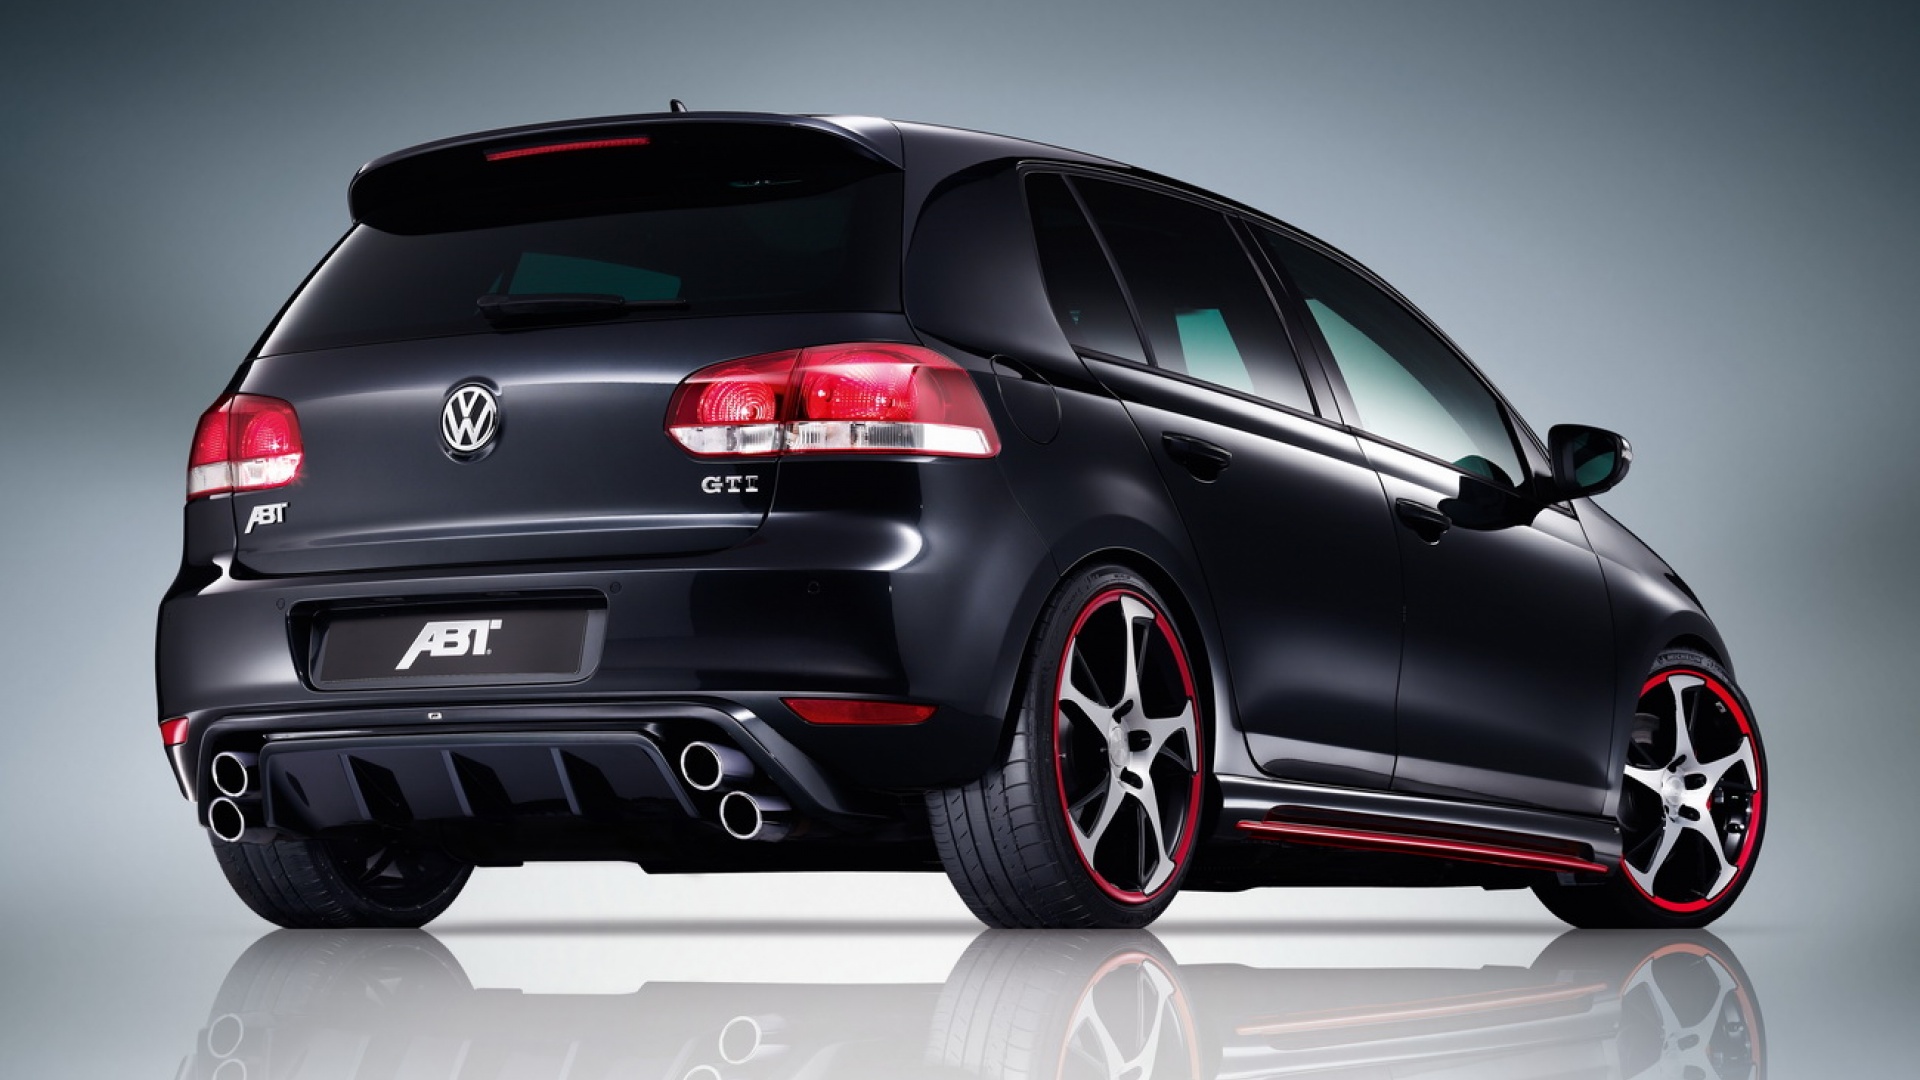 VW Golf Gti wallpaper downloads High resolution images for 1920x1080